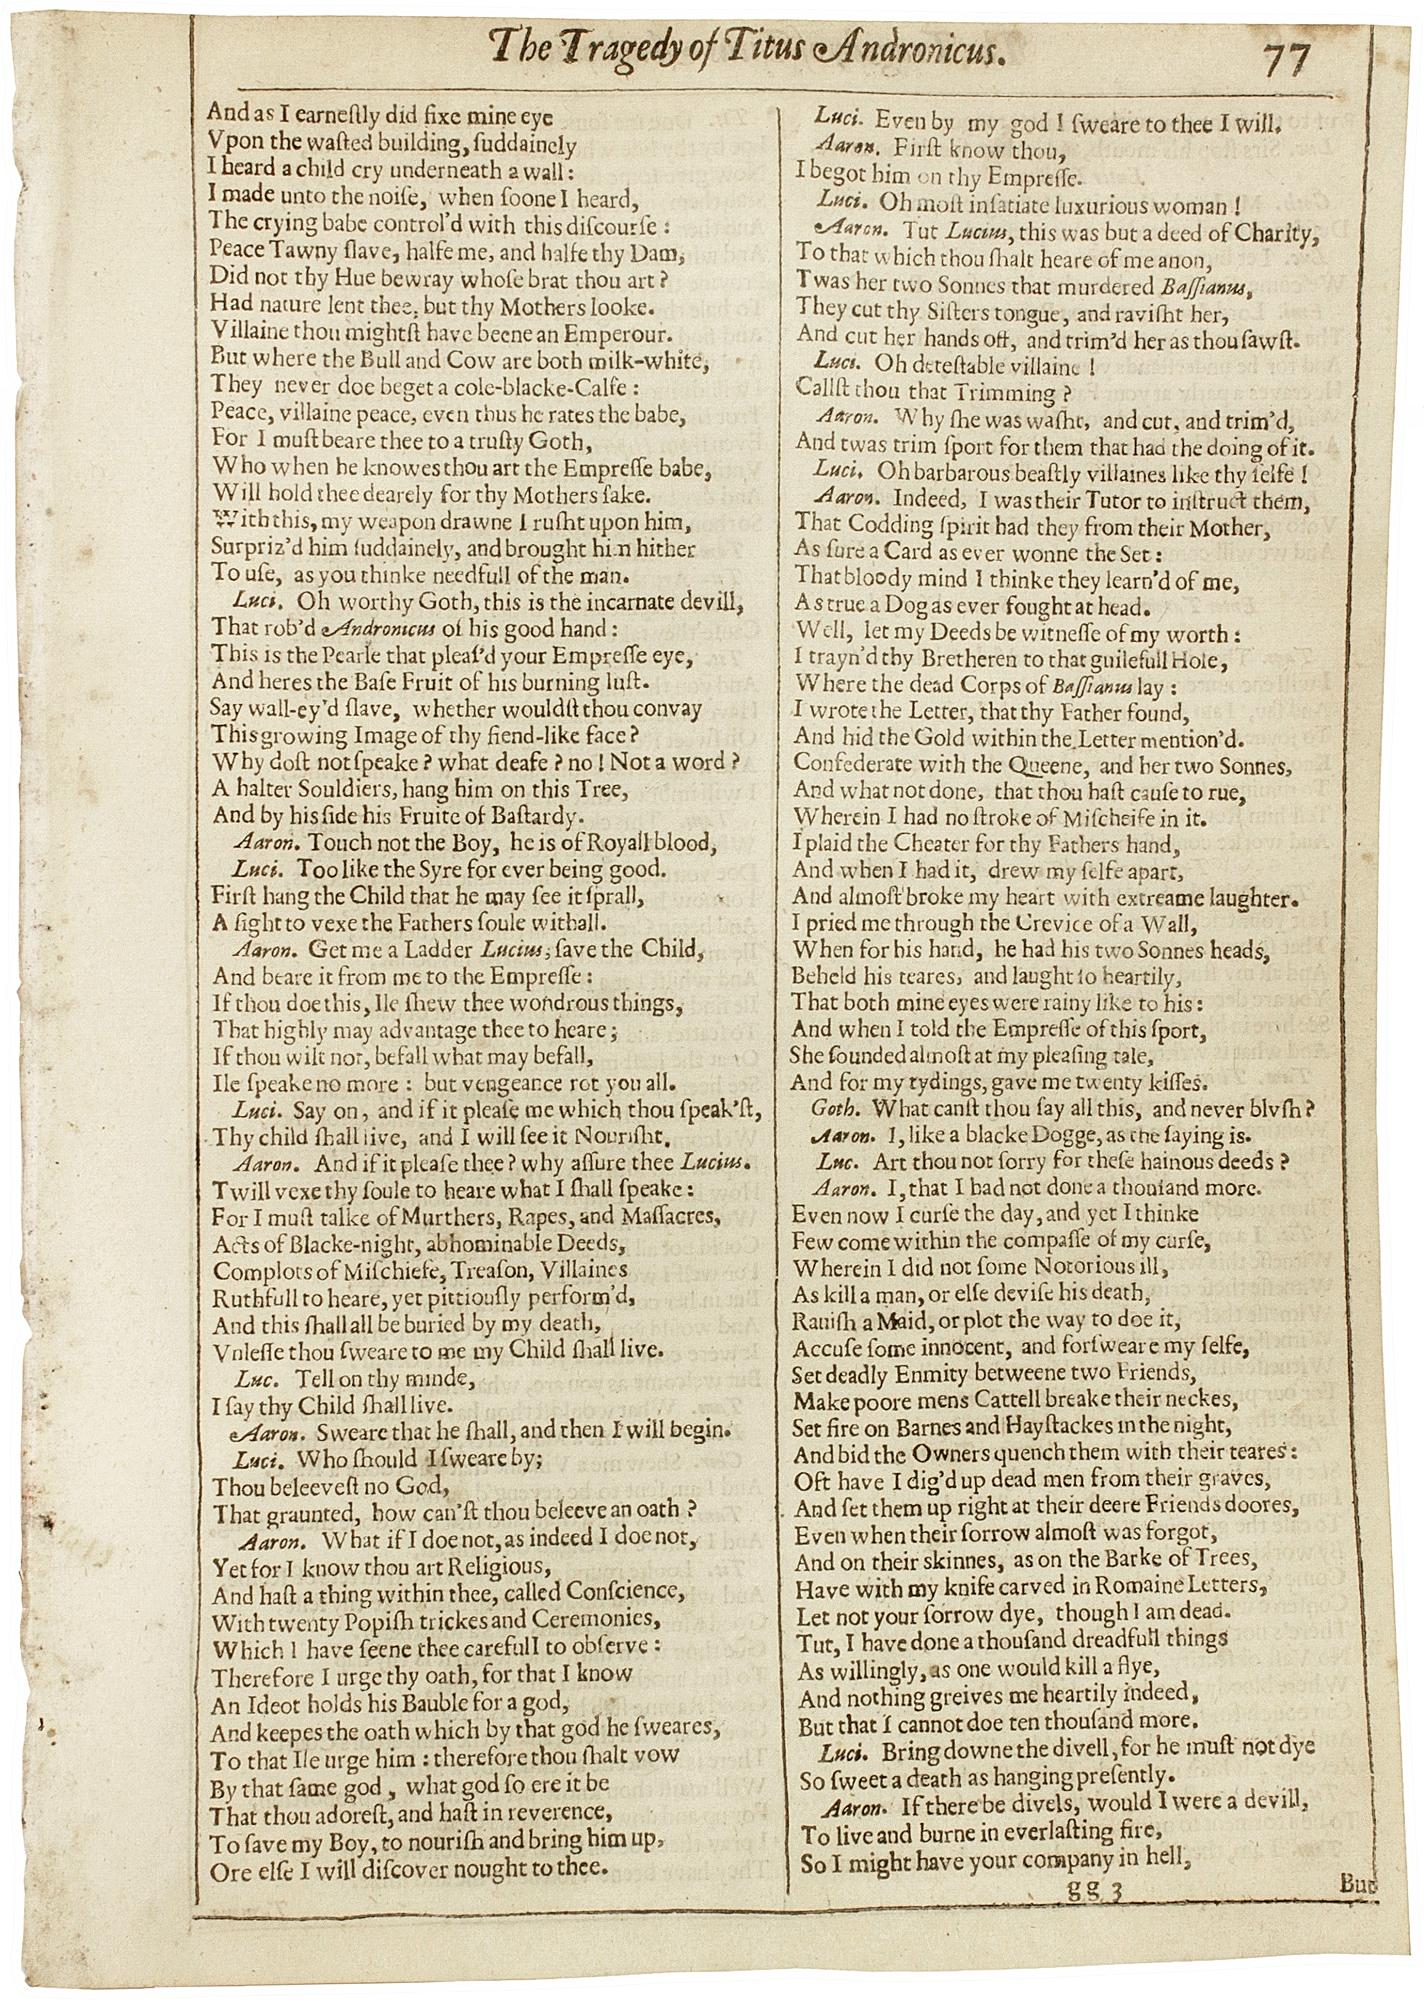 AUTHOR: SHAKESPEARE, William. 

TITLE: The Works of William Shakespeare. (The Tragedy of Titus Andronicus) - page 77-78.

PUBLISHER: London: Smethwick, J., Aspley, W., Hawkins, Richard, & Meighan, Richard, 1632.

DESCRIPTION: THE SECOND FOLIO.